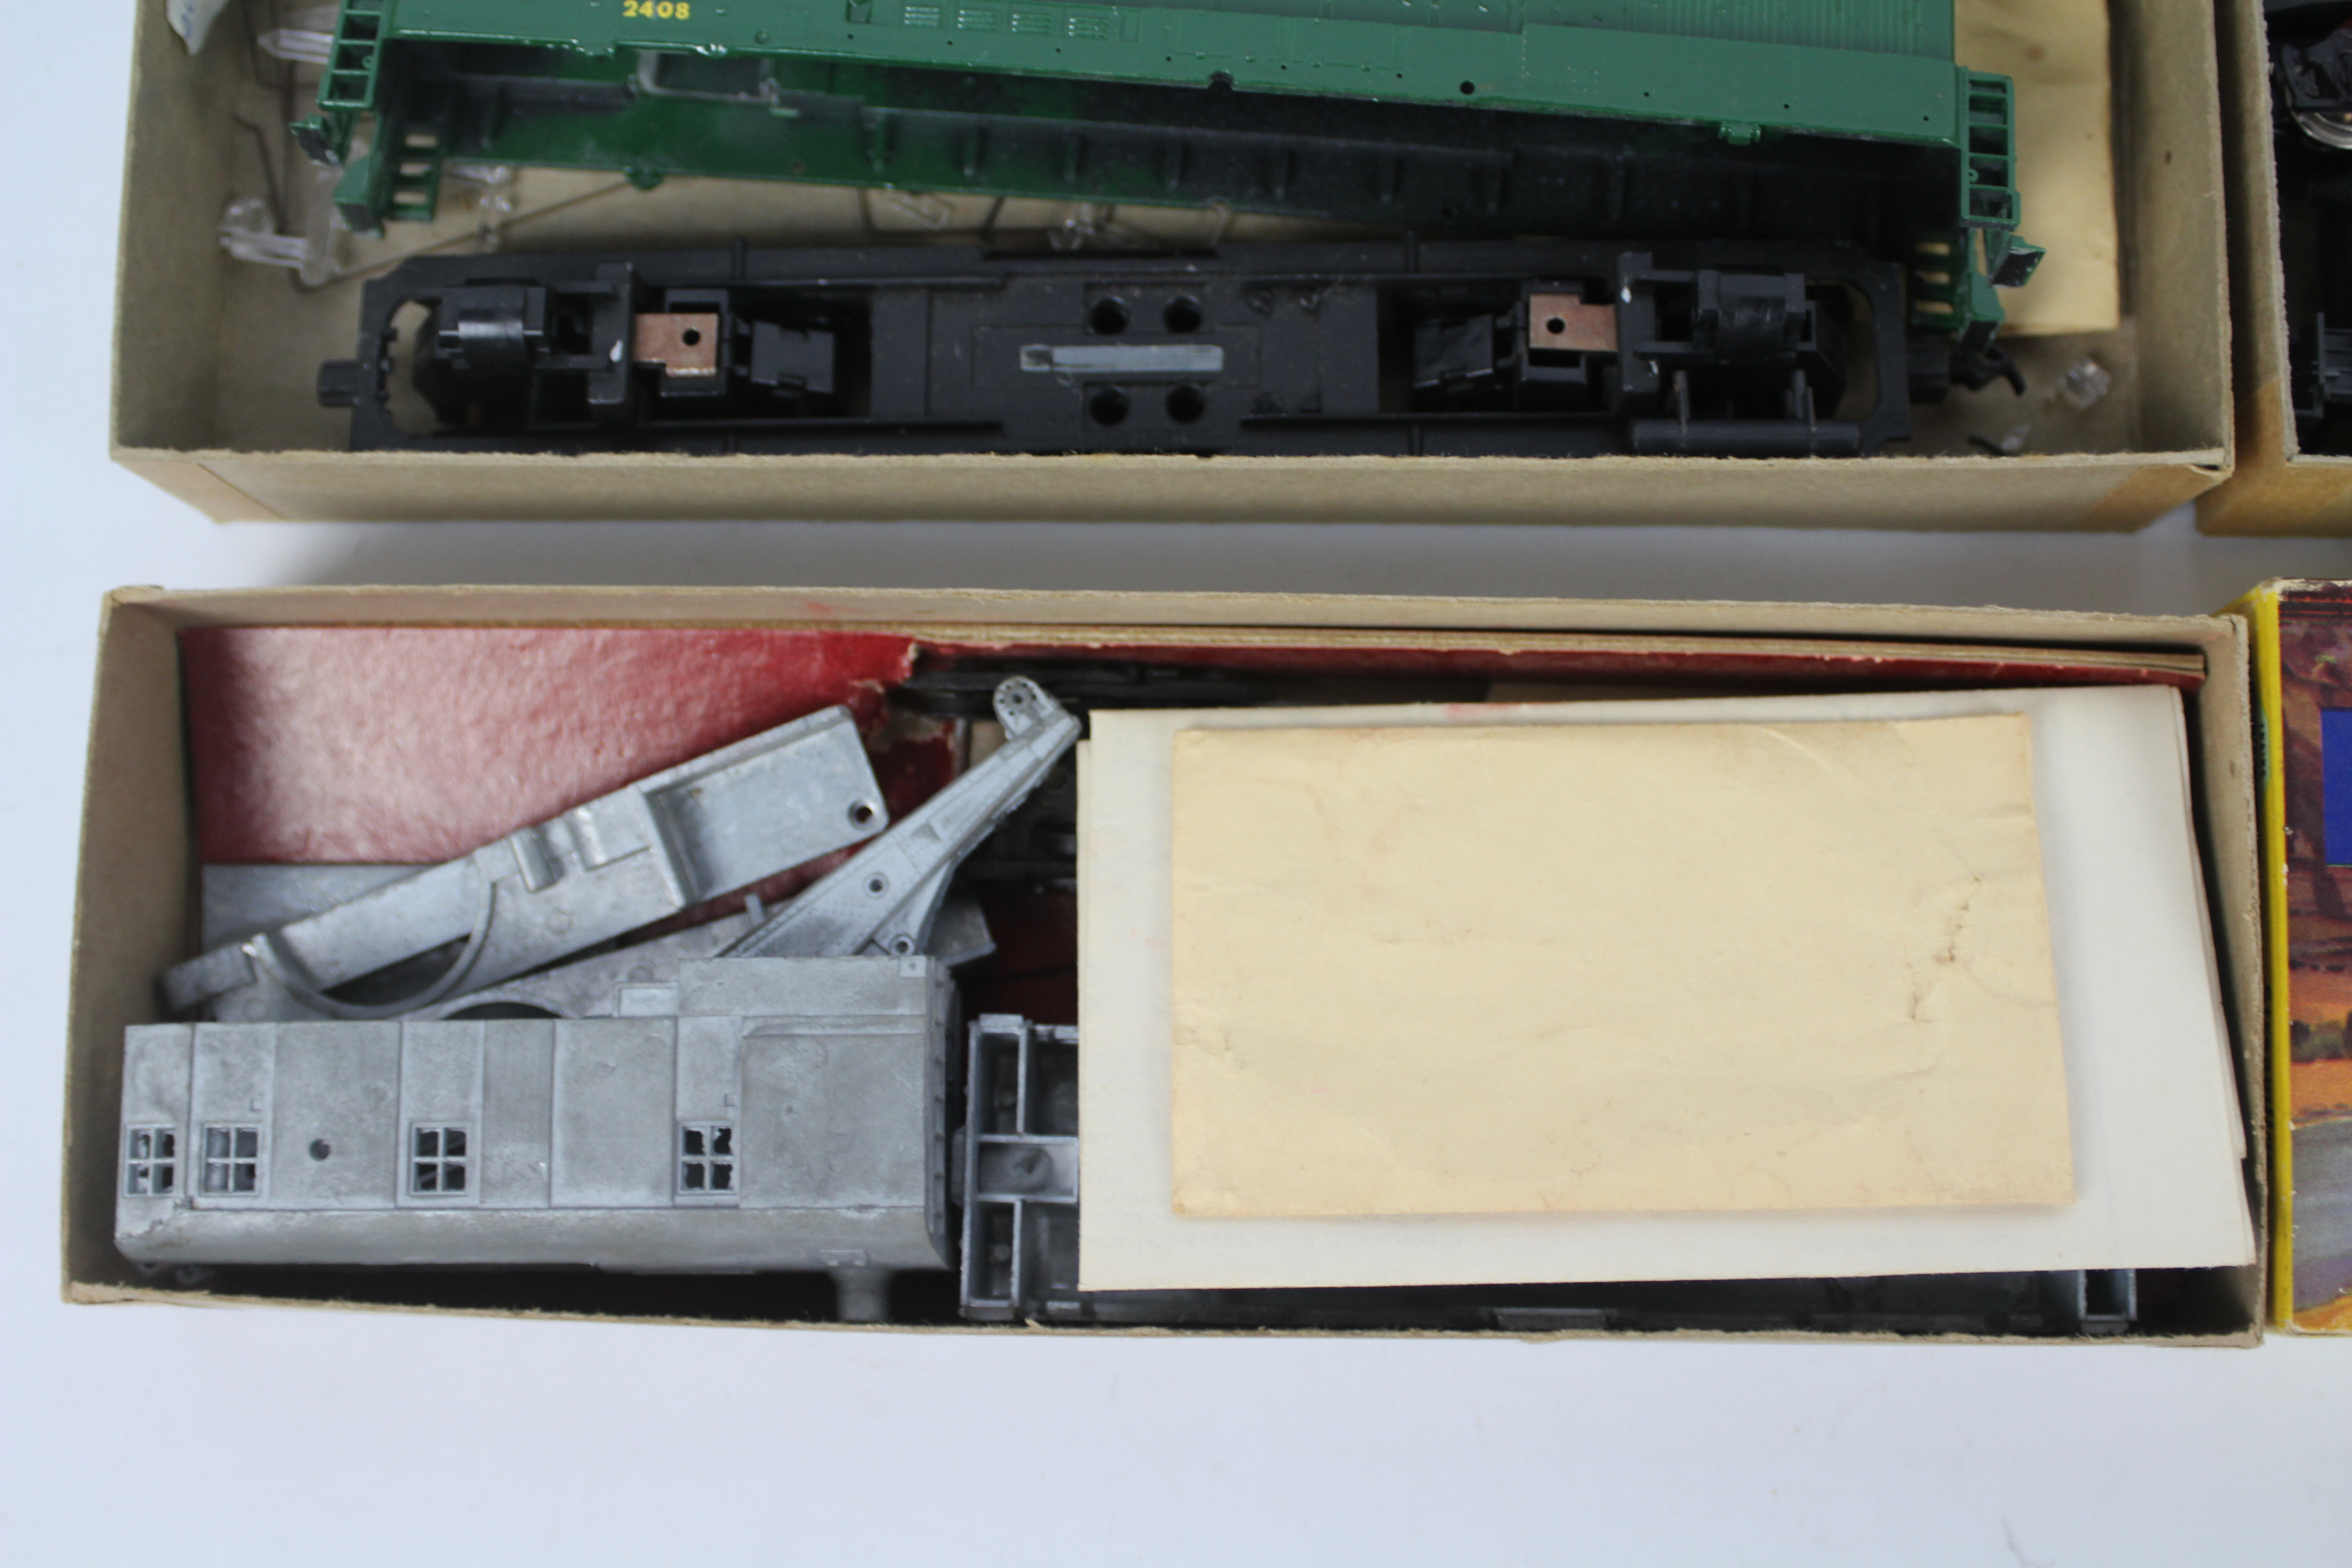 Athearn - Three boxed part built HO gauge American diesel road locomotive kits from Athearn. - Image 4 of 4